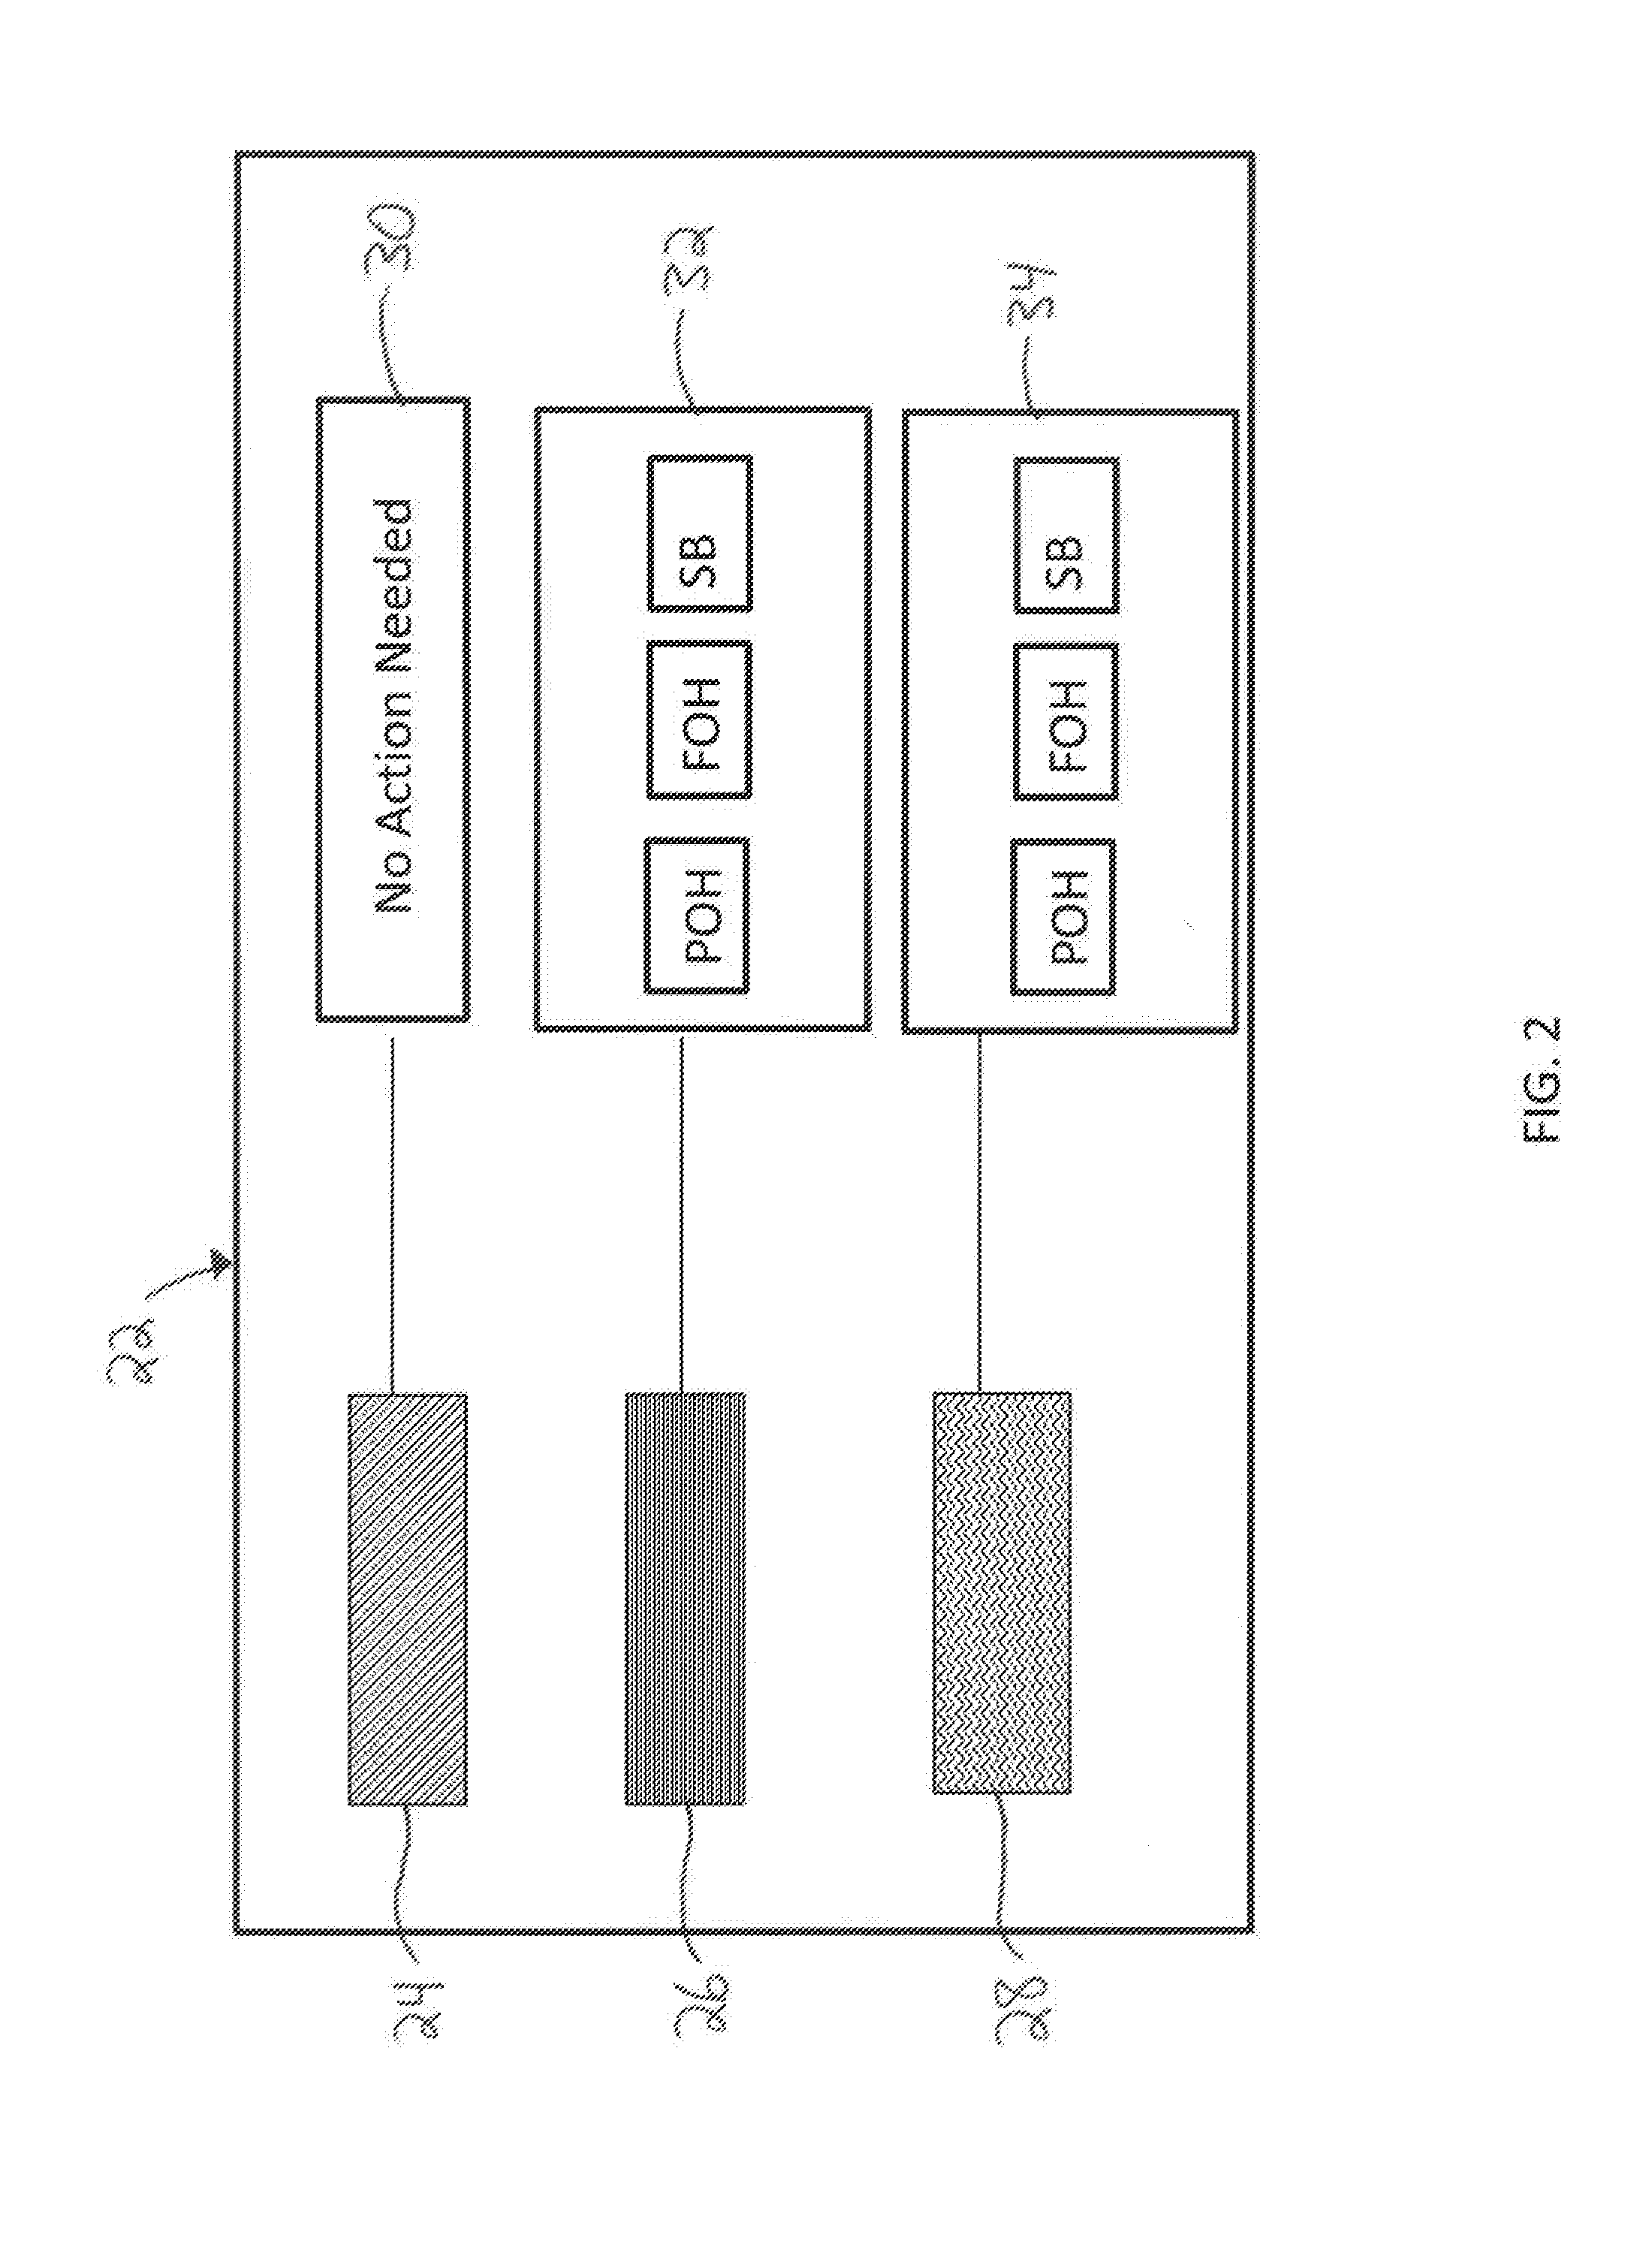 Method of determining availability and reliability of facility equipment